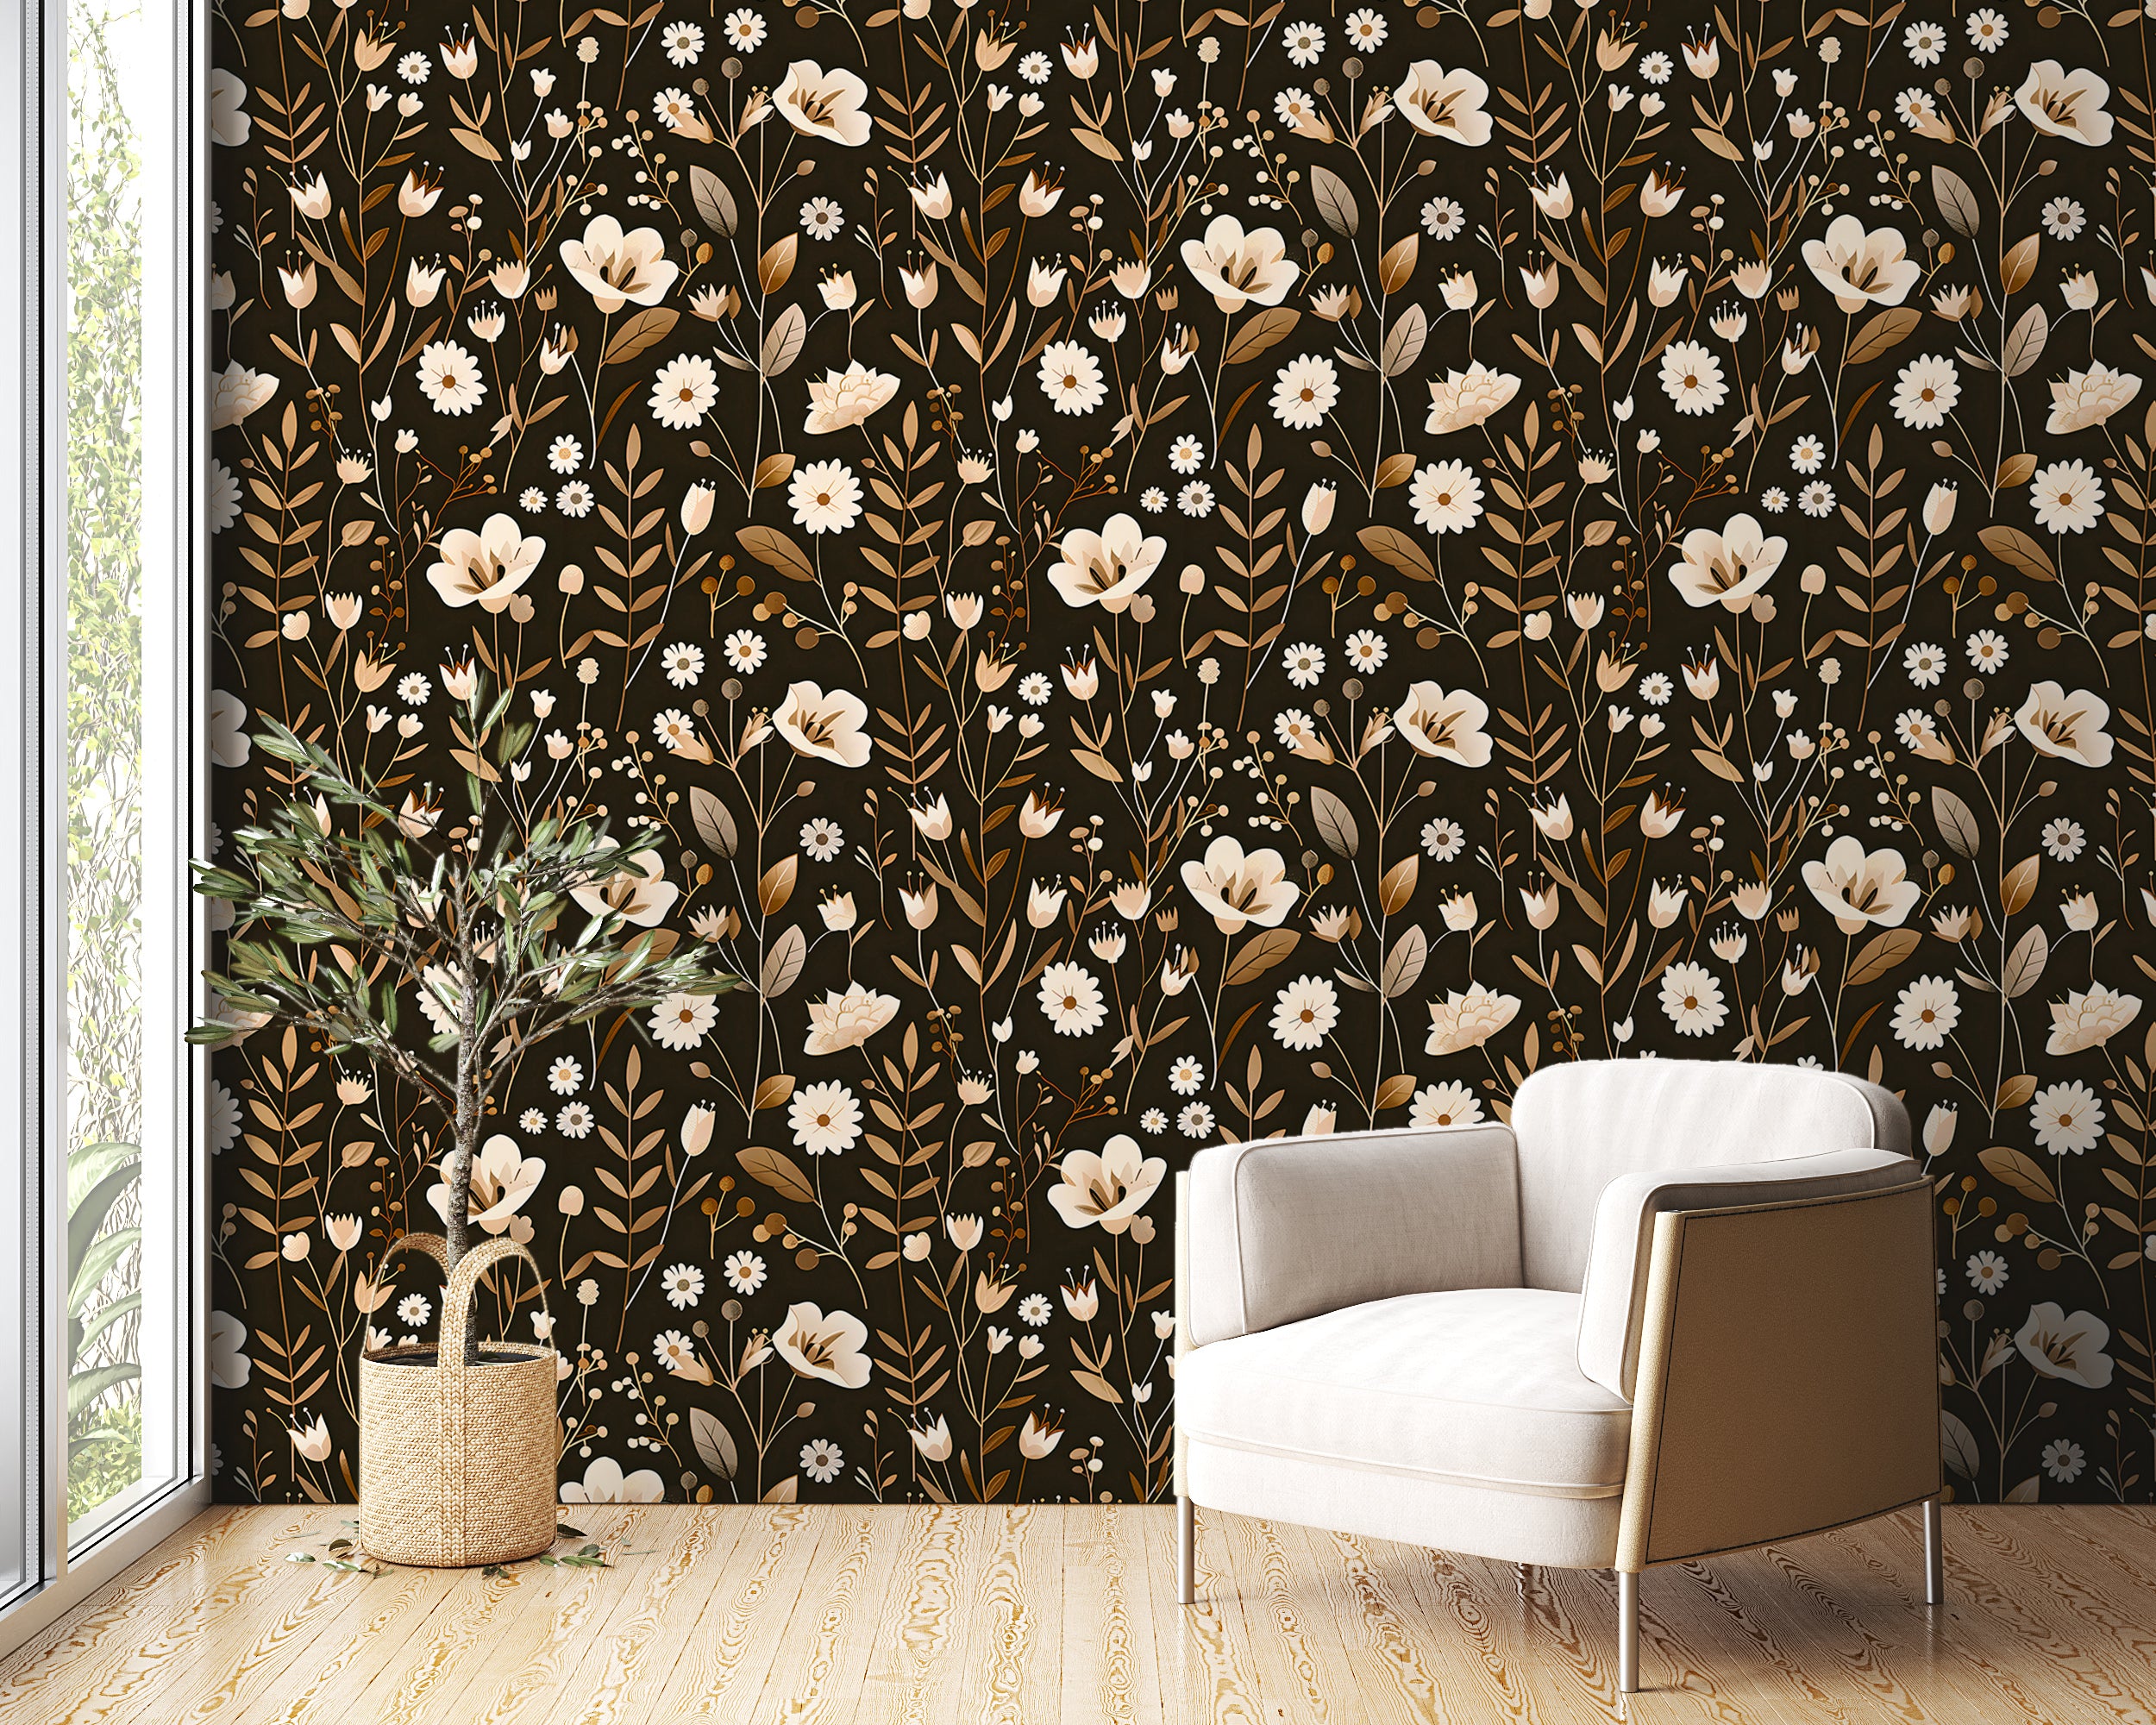 Dark Meadow Floral Wallpaper, White and Brown Botanical Decal, Wild Flowers Wallpaper, Peel and Stick Removable Vintage Flower Decal